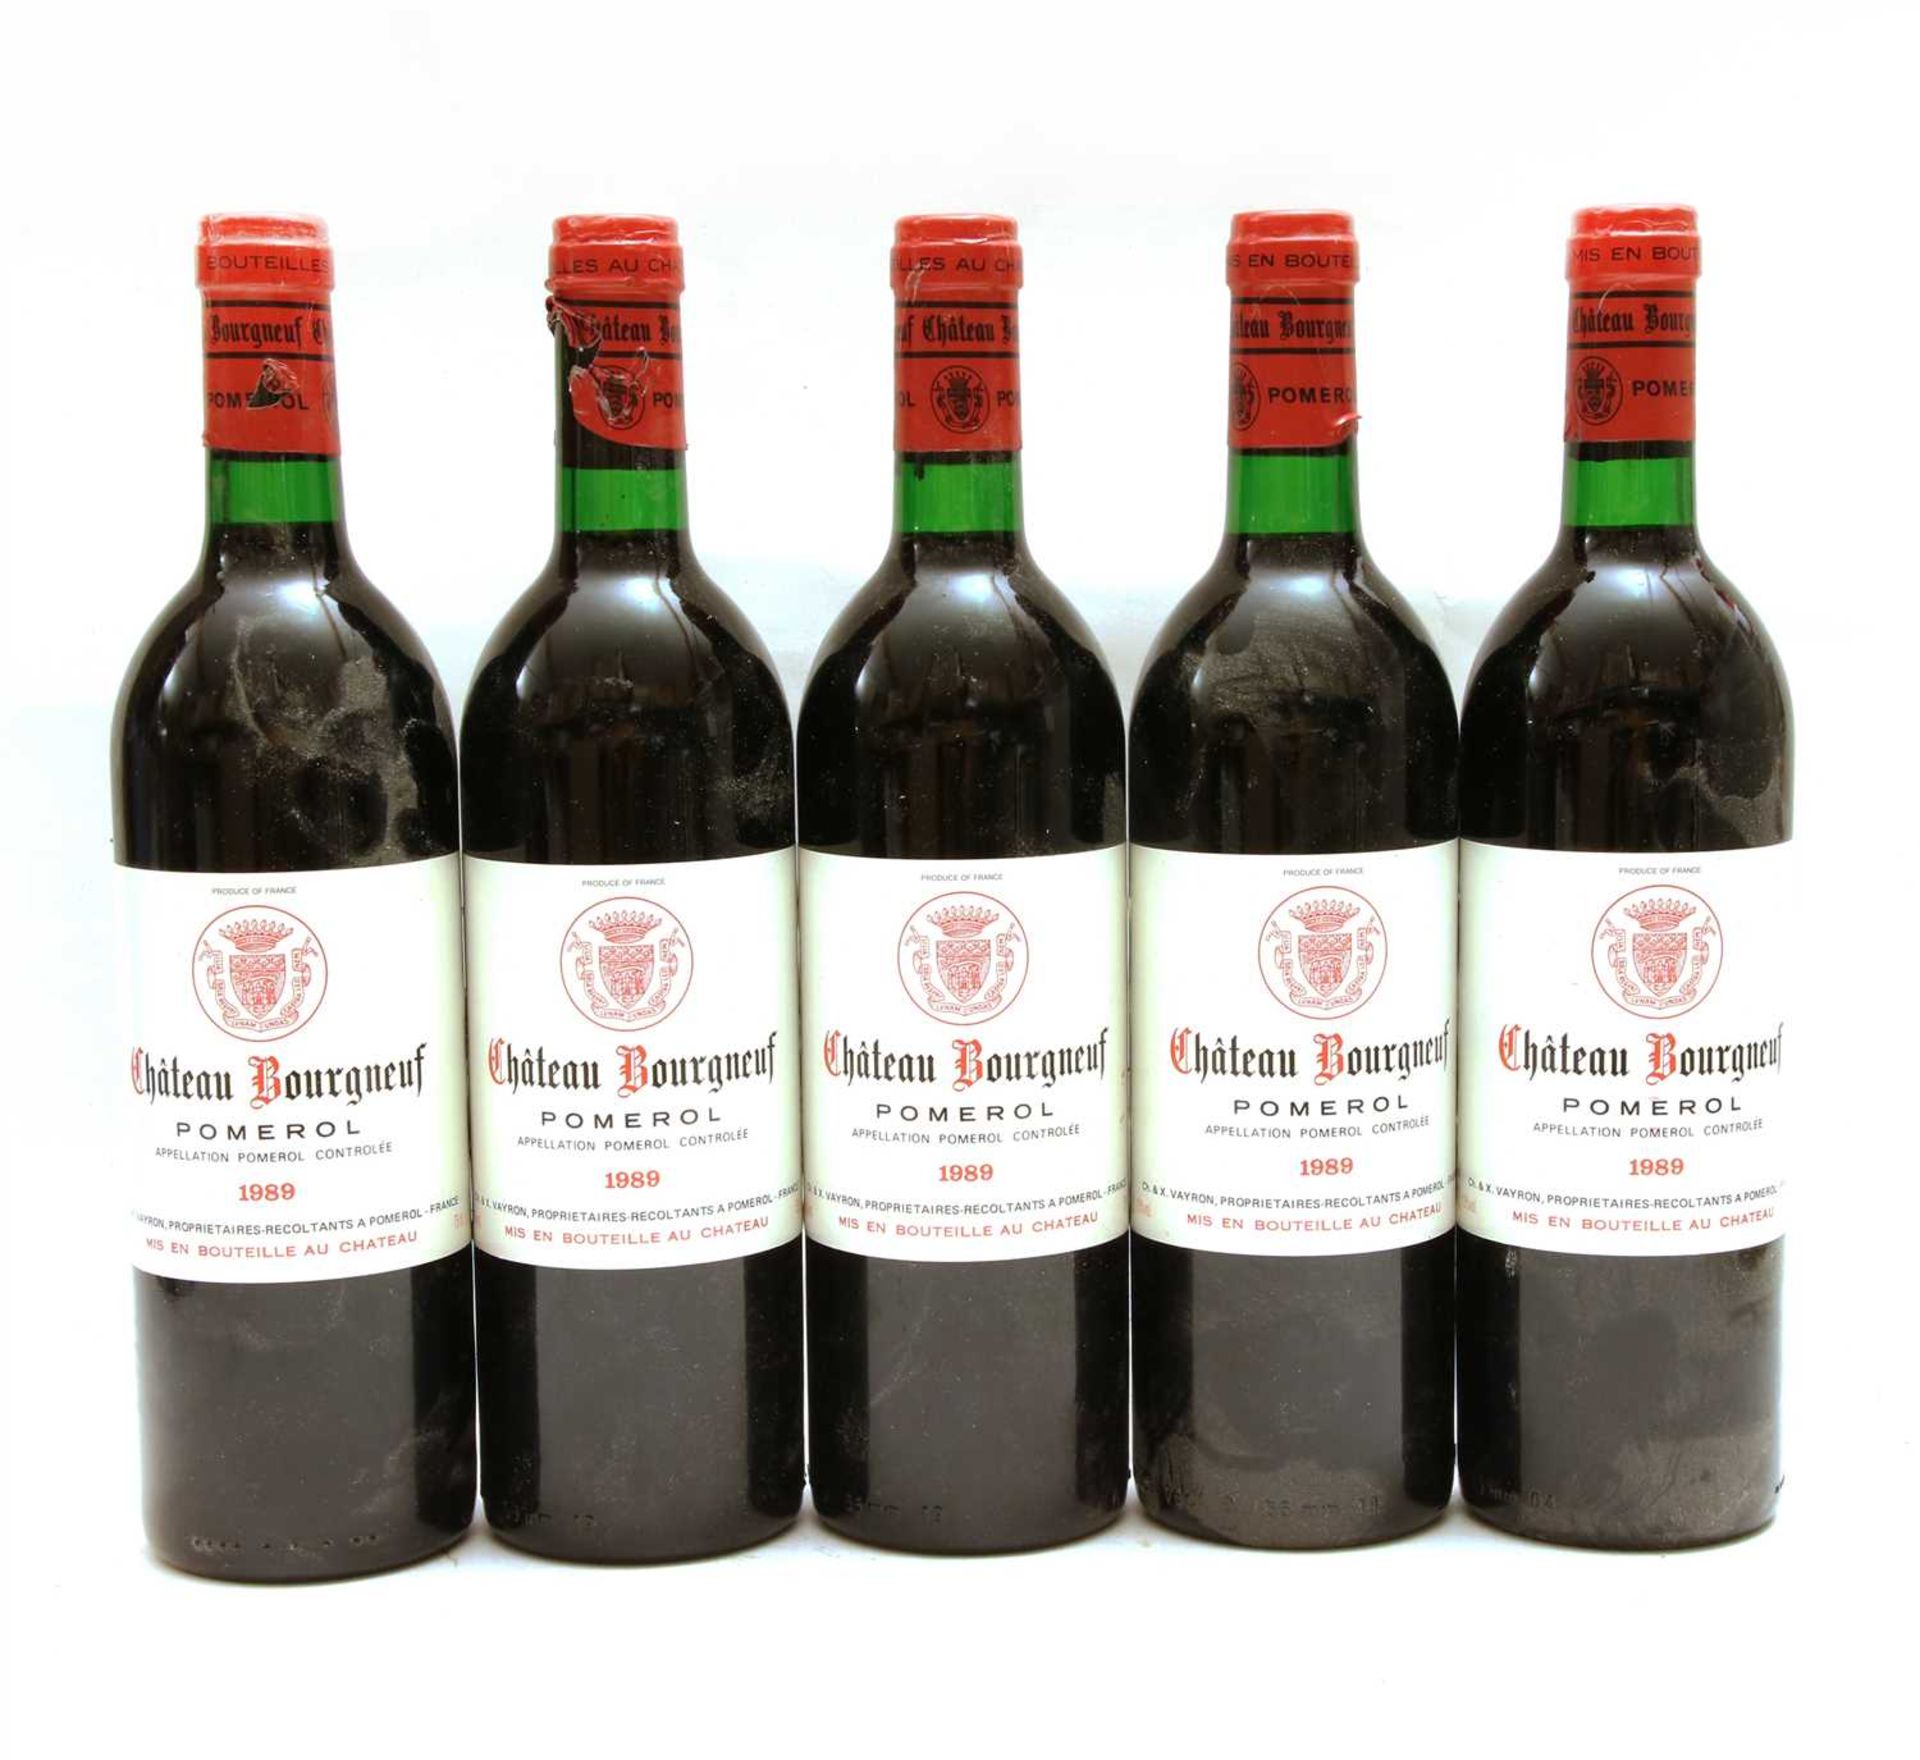 Château Bourgneuf, Pomerol, 1989, five bottles